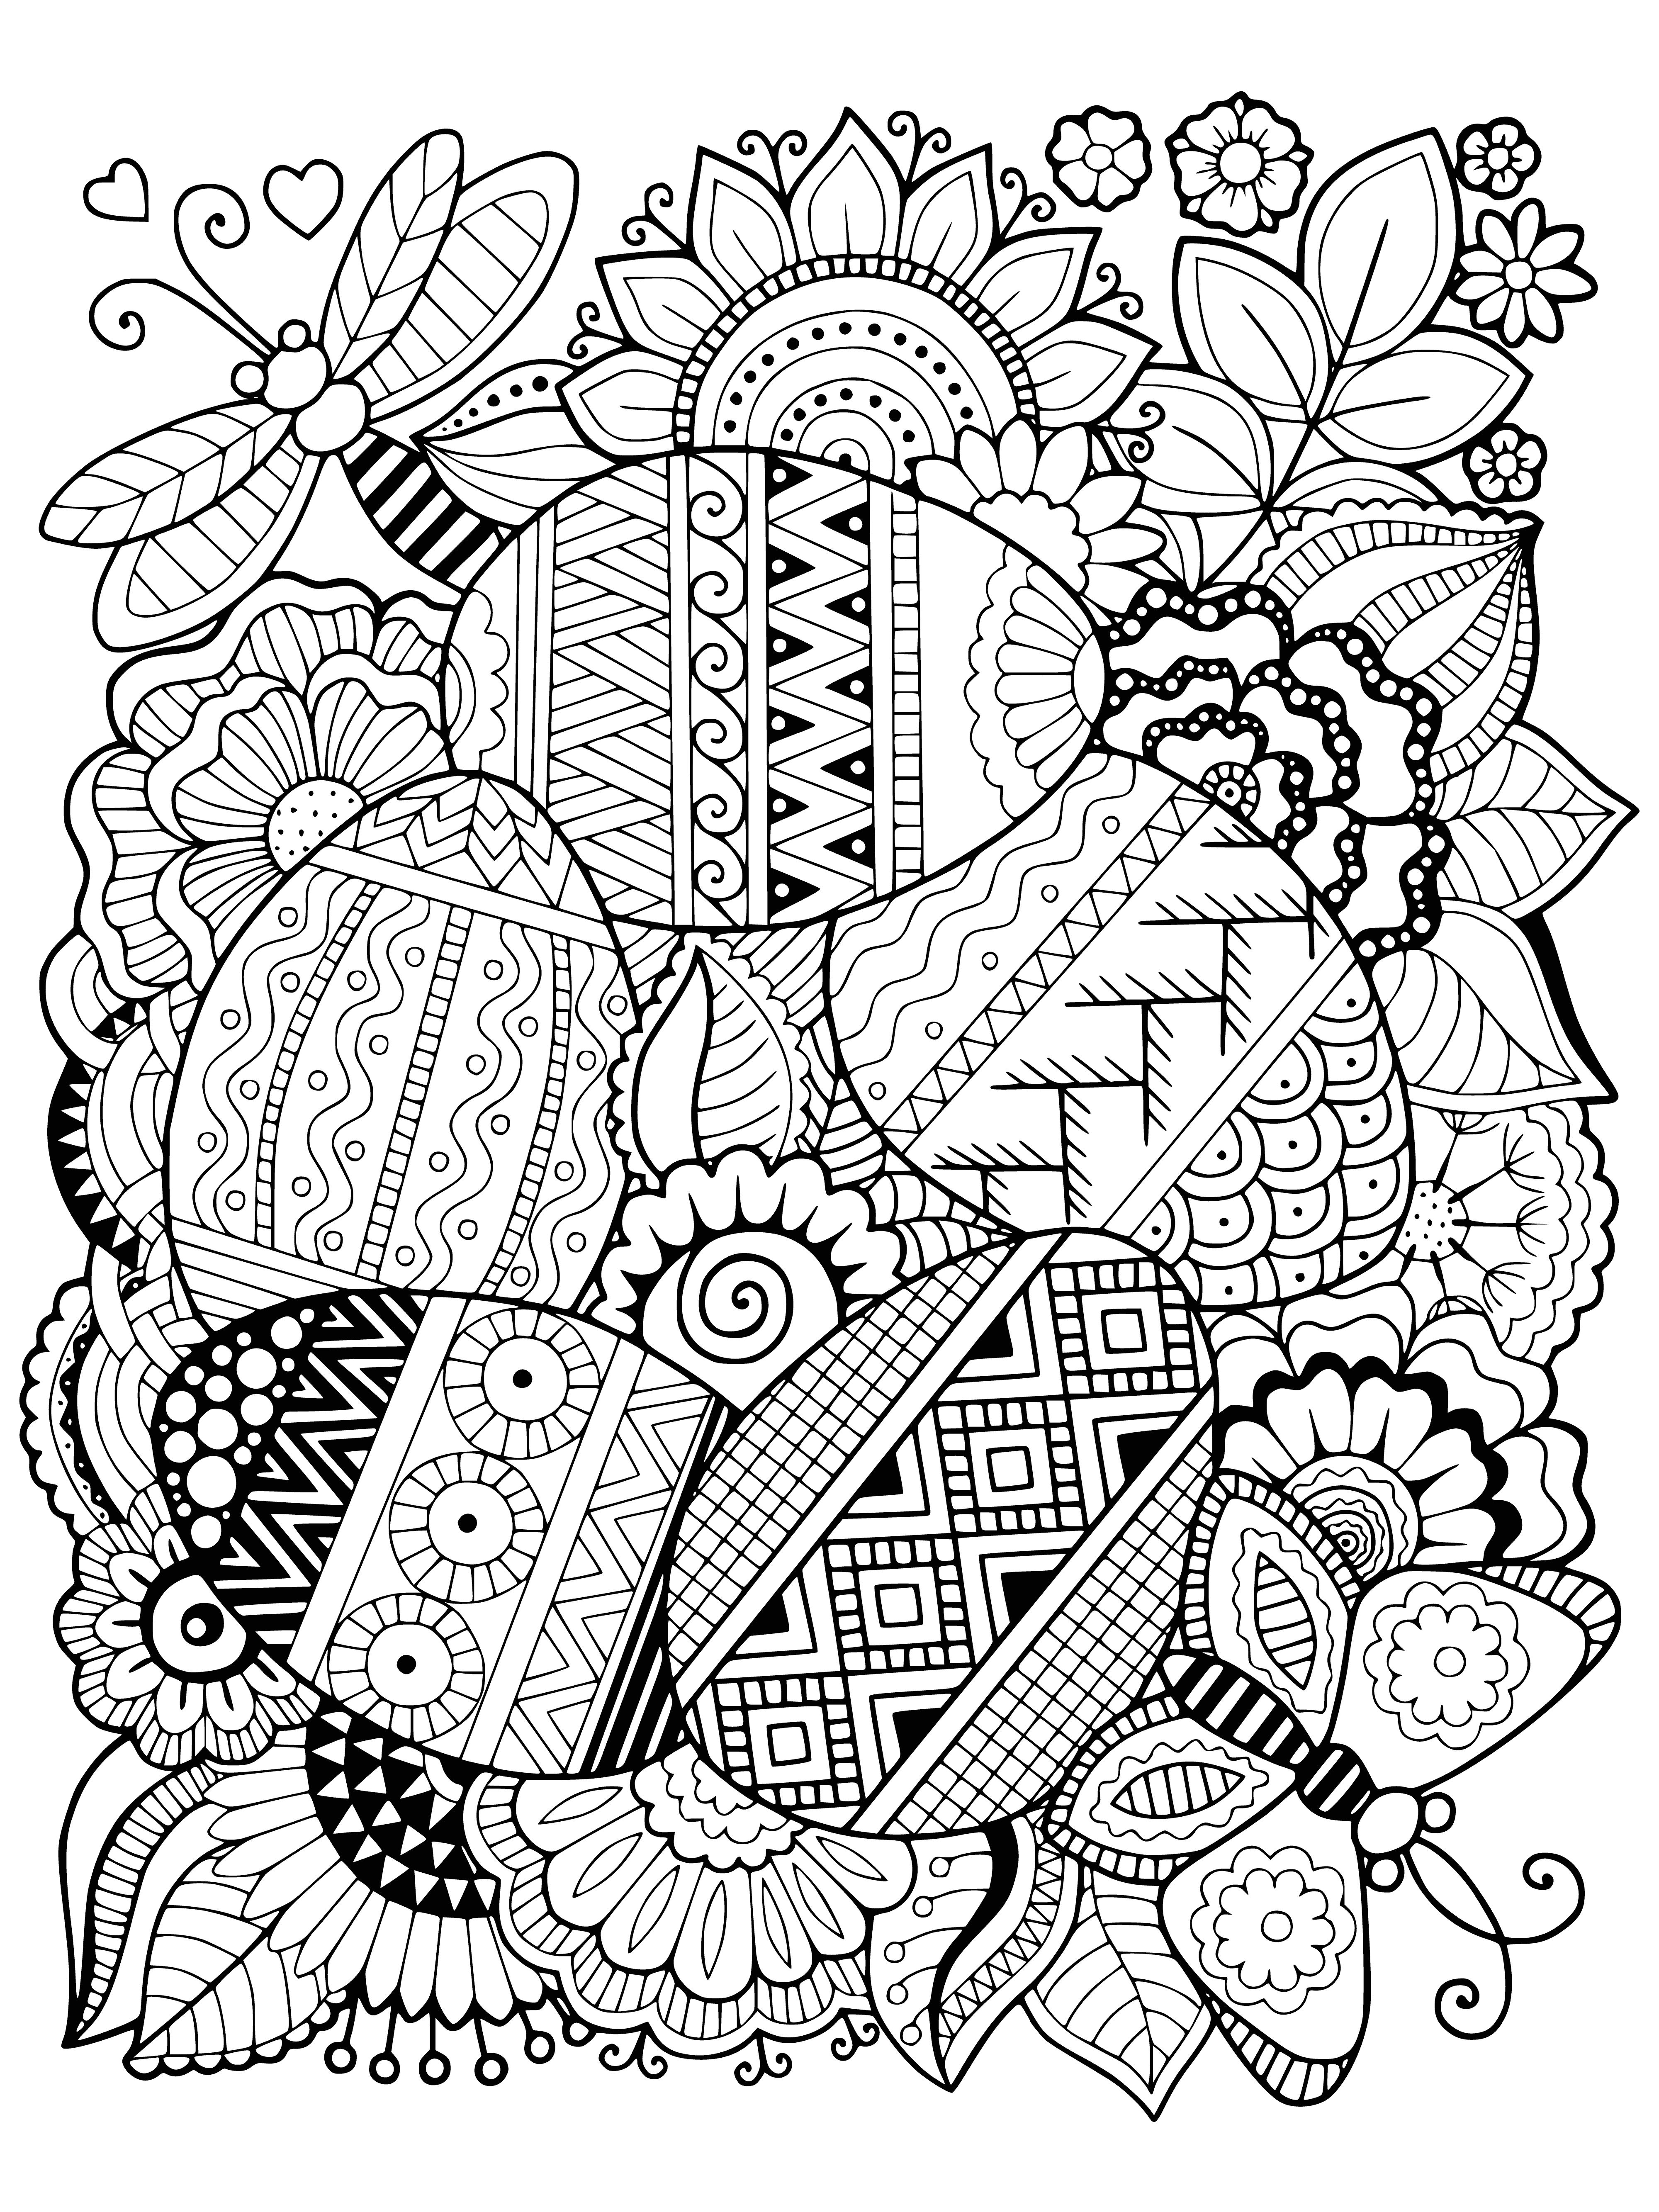 Easter eggs coloring page